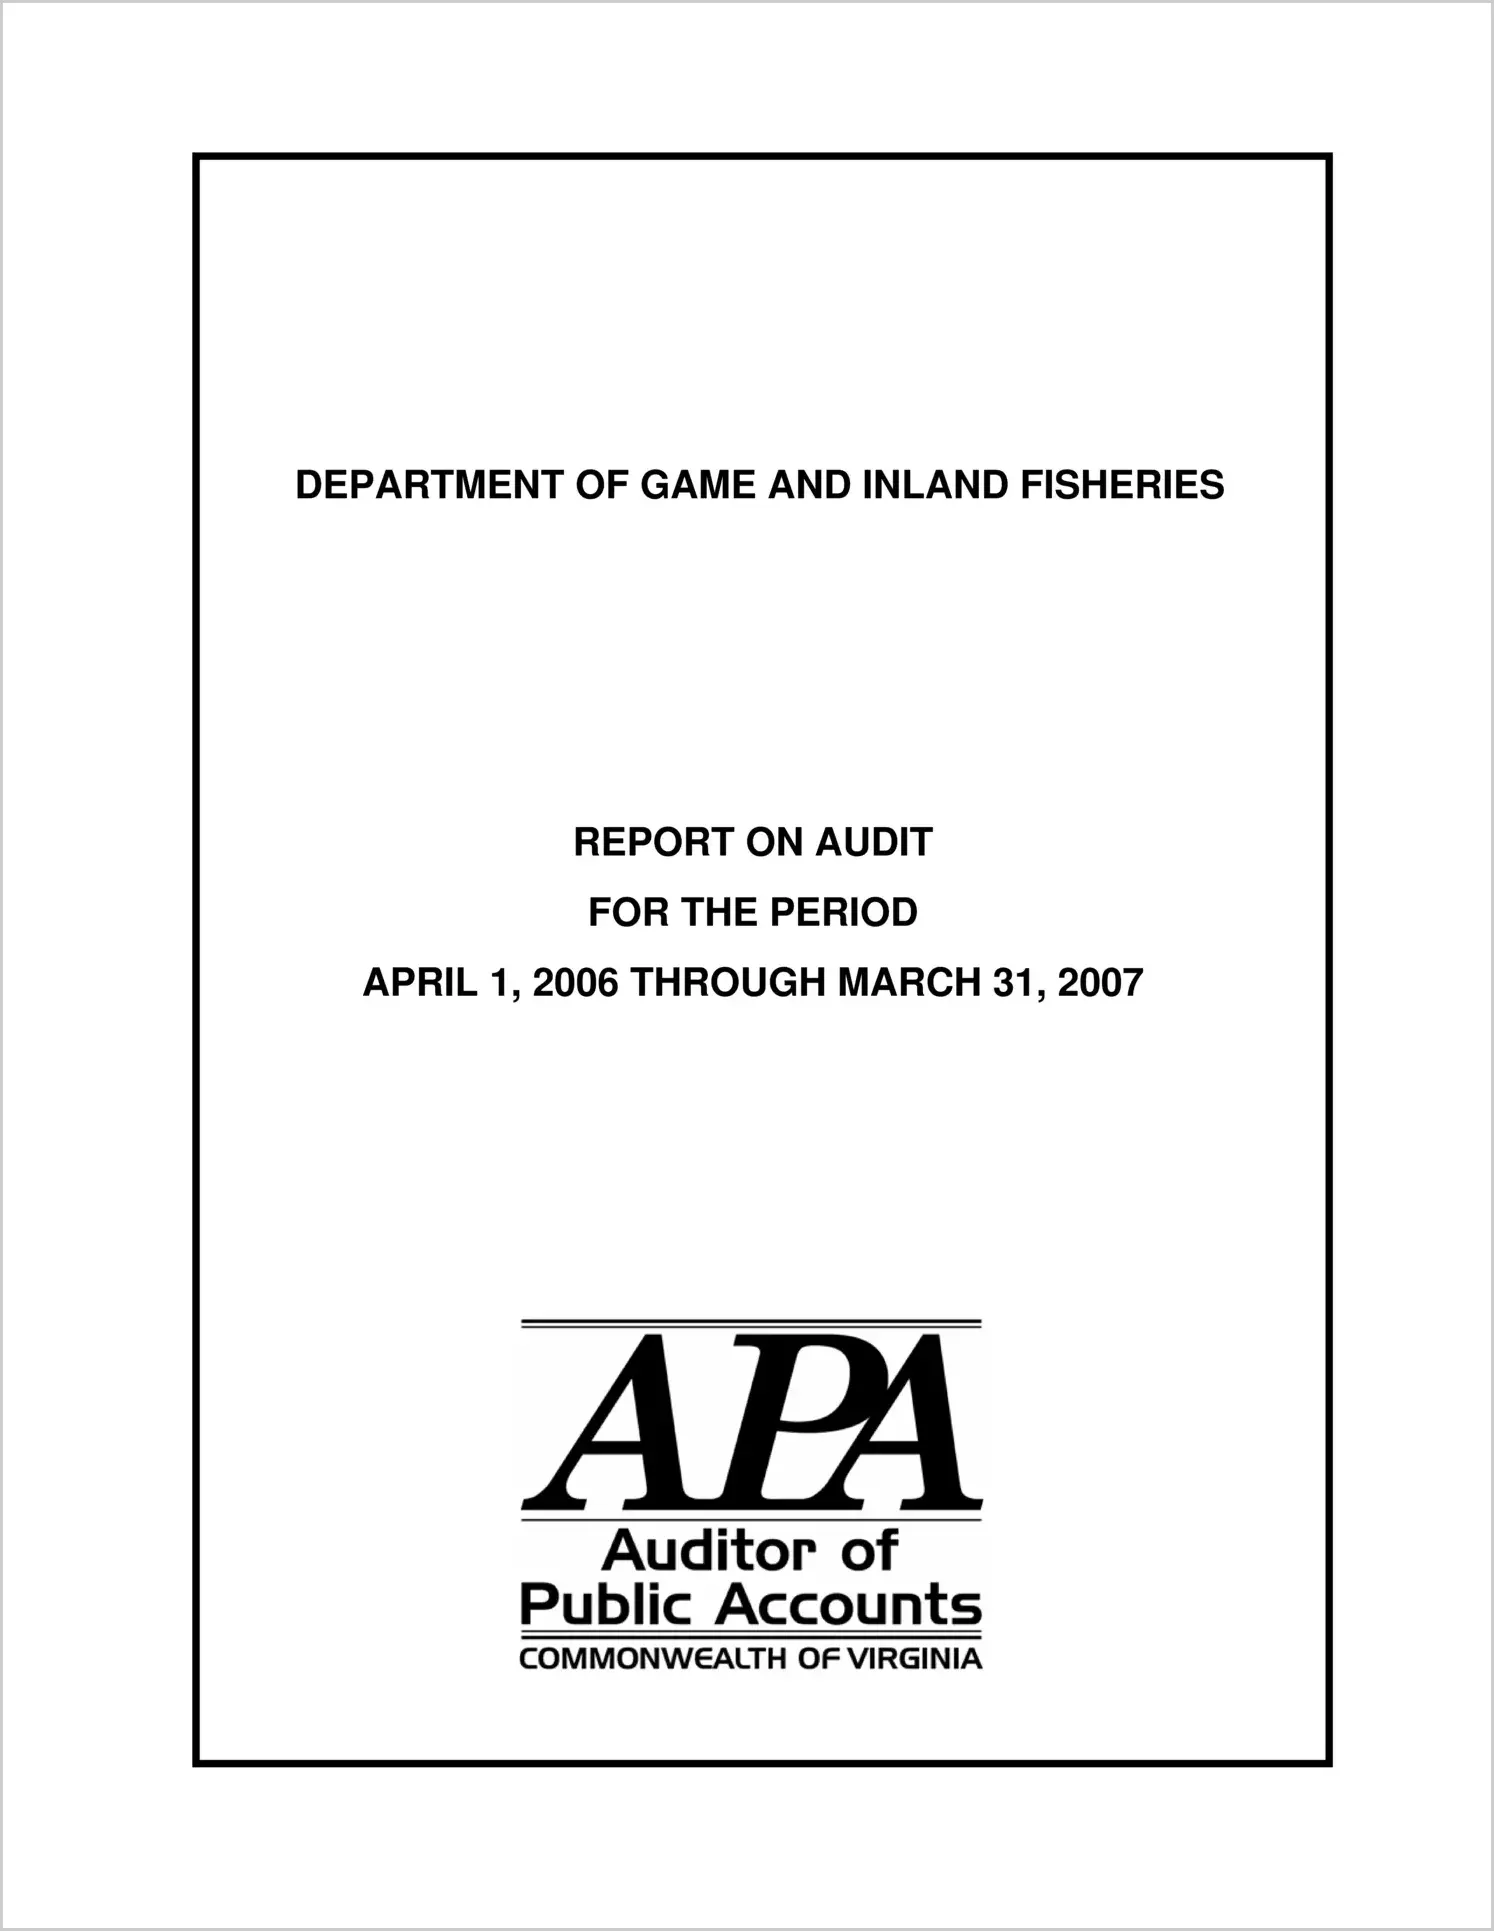 Department of Game and Inland Fisheries for the period April 1, 2006 through March 31, 2007